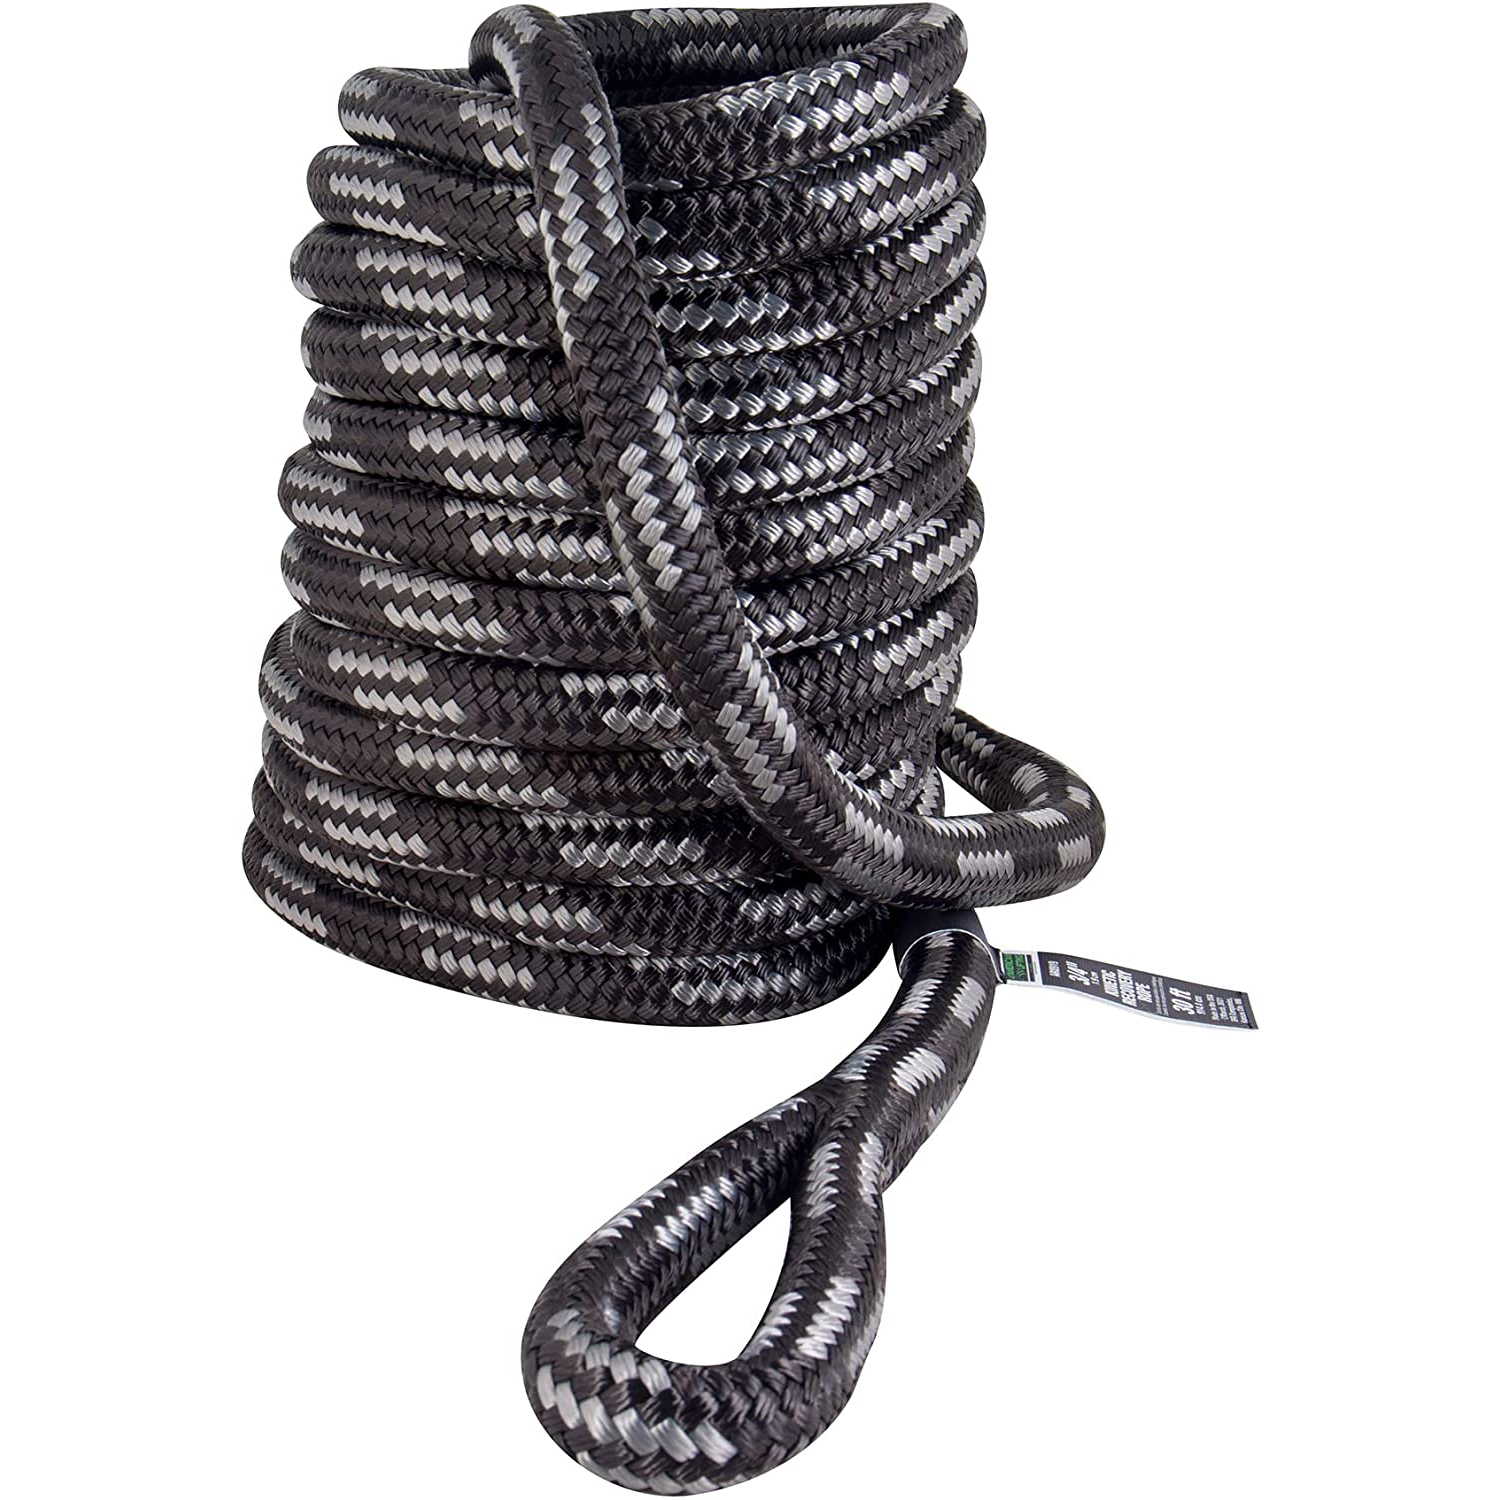 American Lifting Off-Road Kinetic Recovery Rope – Heavy Duty Tow Strap 19,000 Lbs